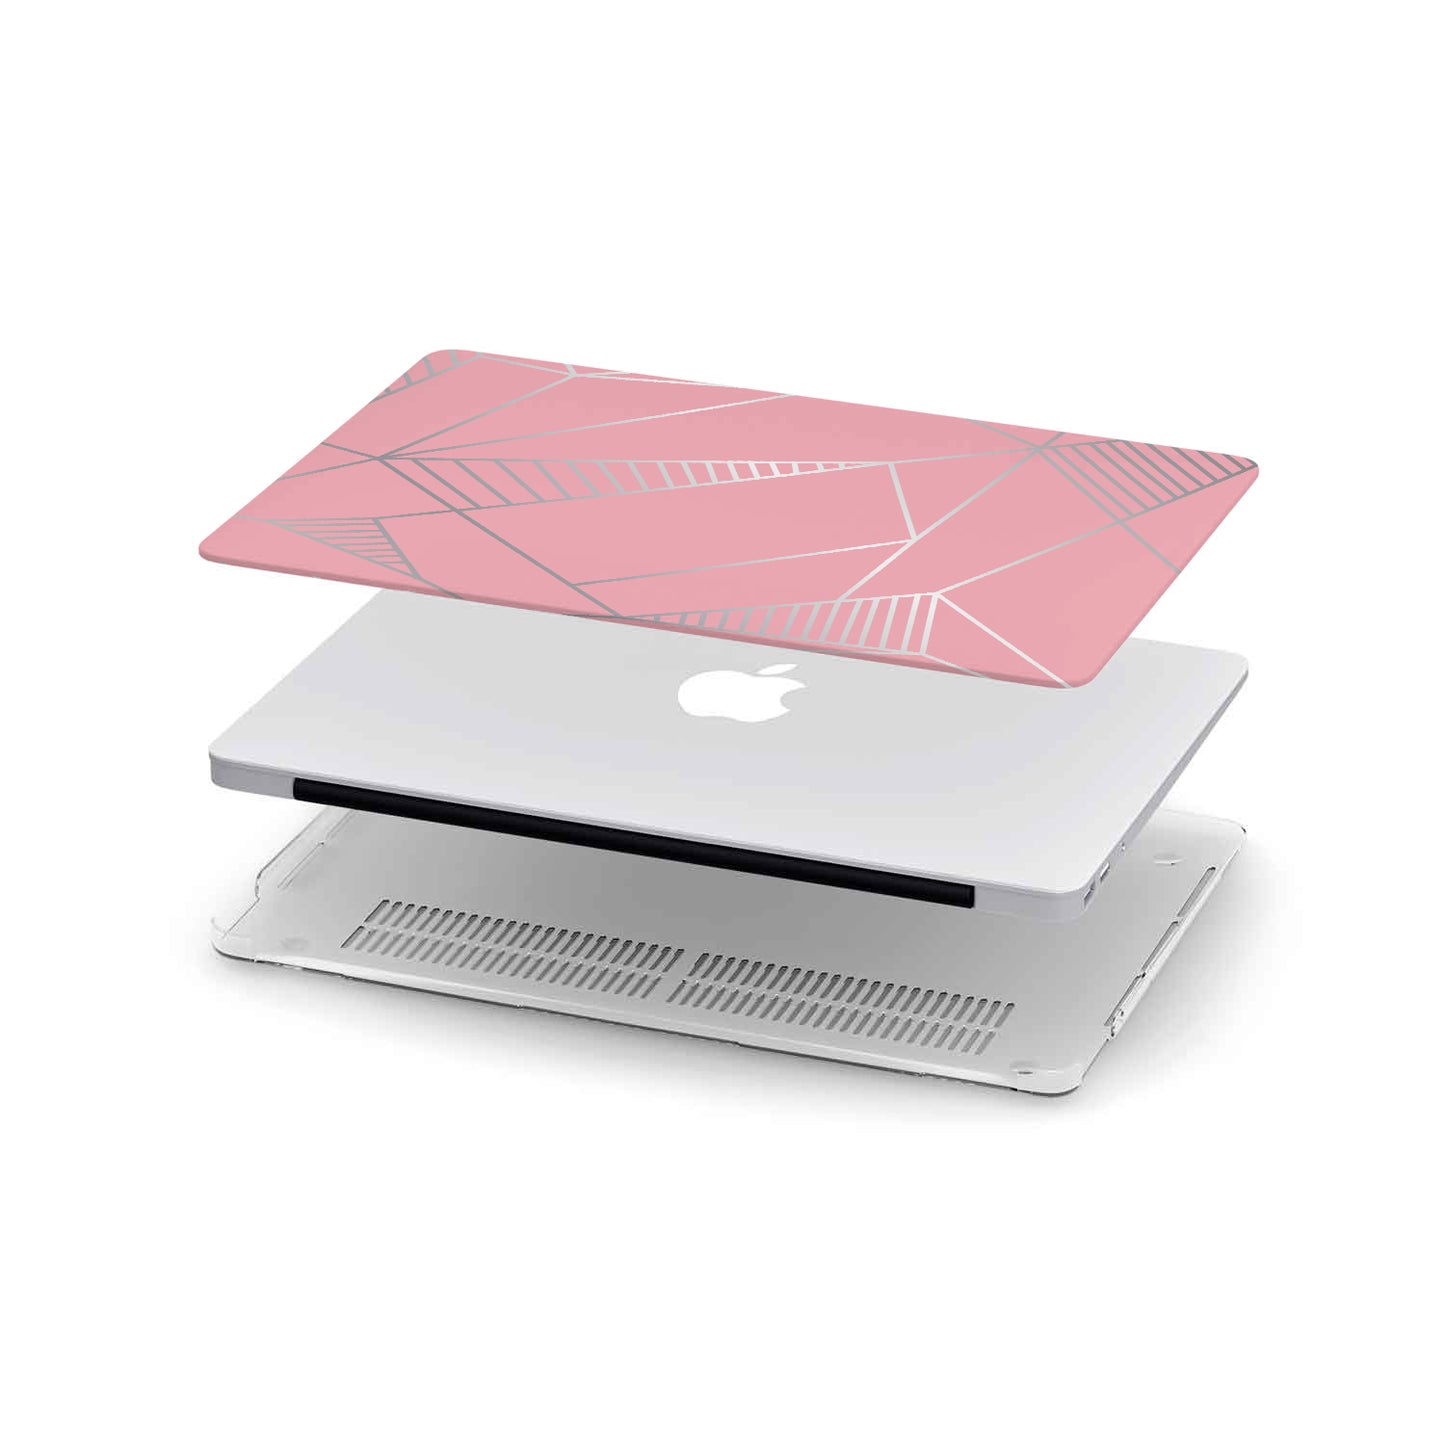 Macbook Hard Shell Case - Pink & Silver Geometric (Personalized)